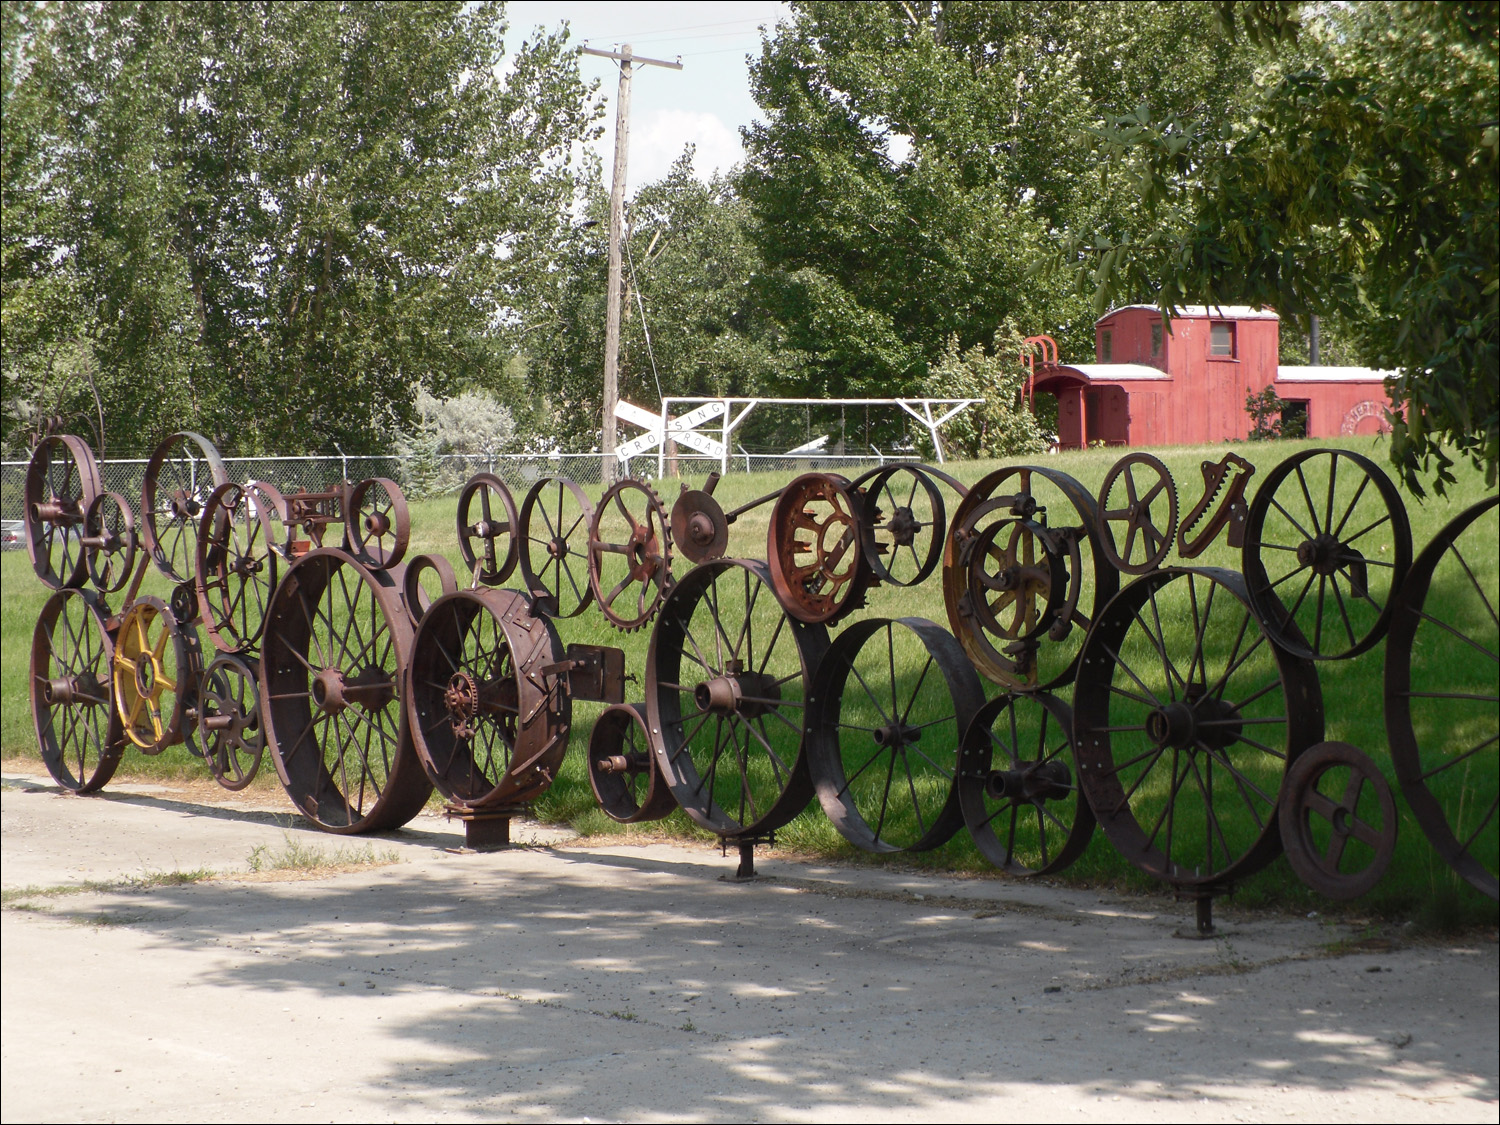 Fort Benton, MT Agriculture Museum-fence of old iron wheels